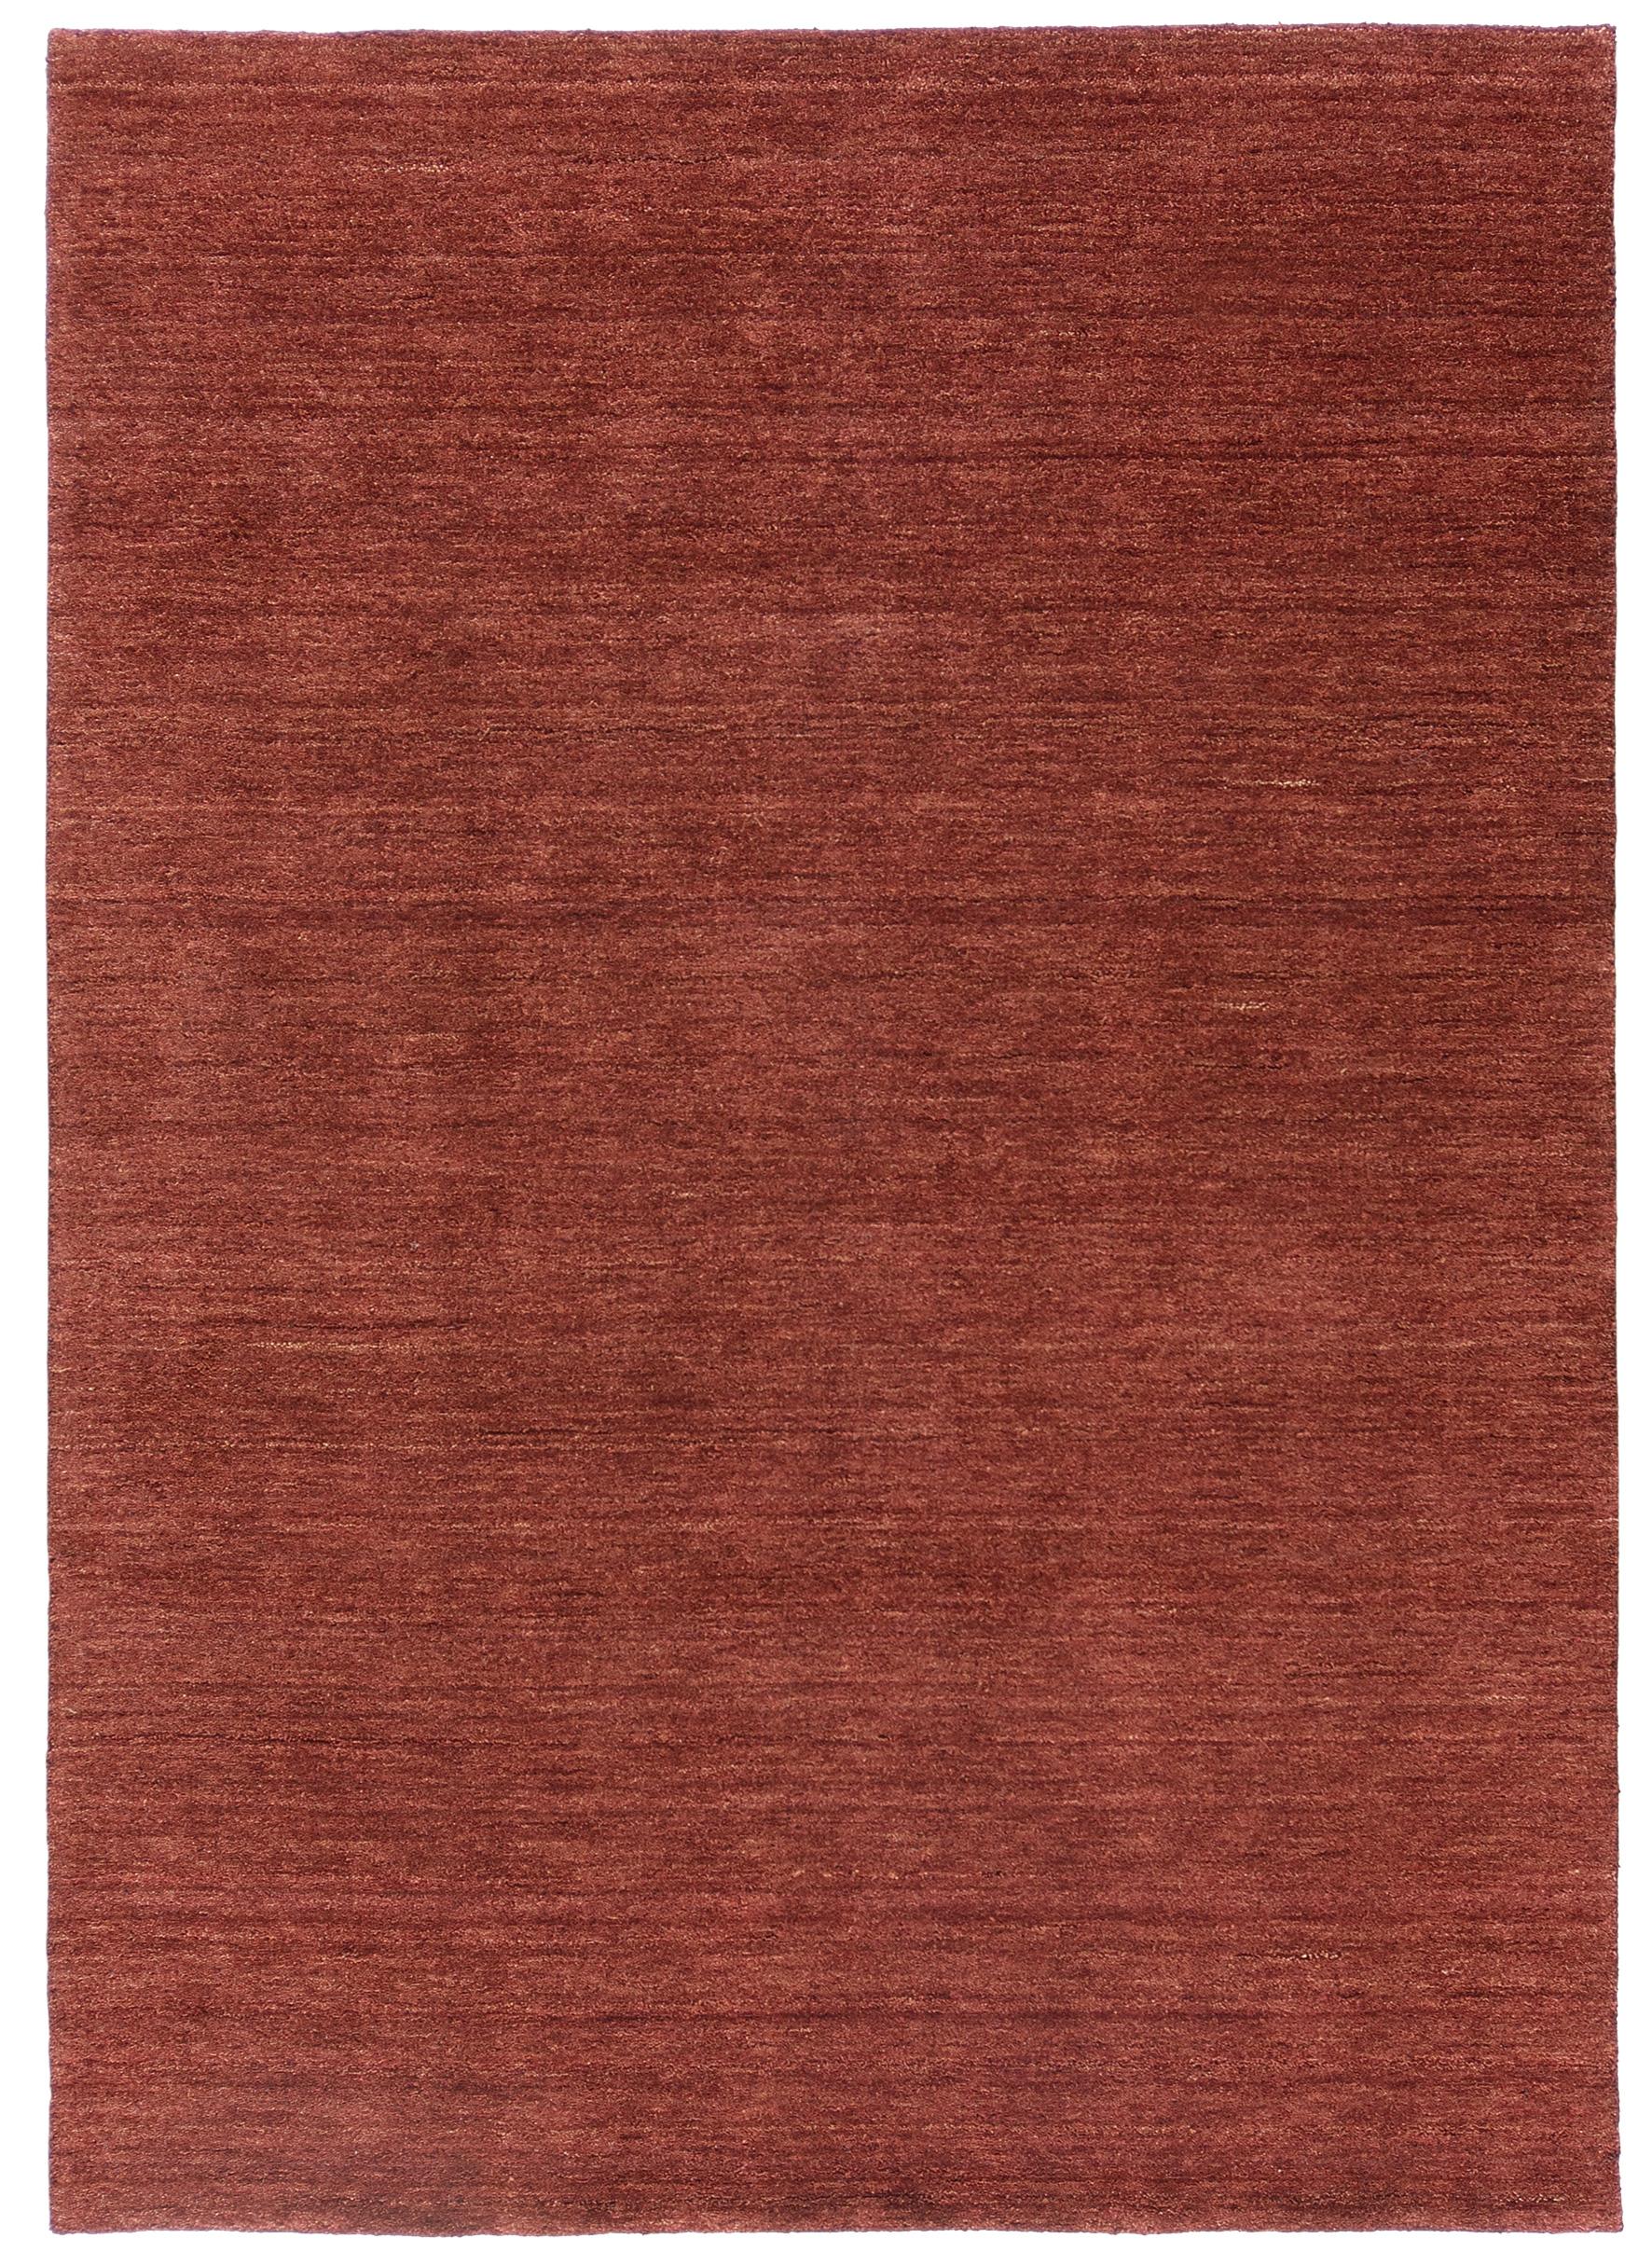 Wool  Sand Red 240 x 170